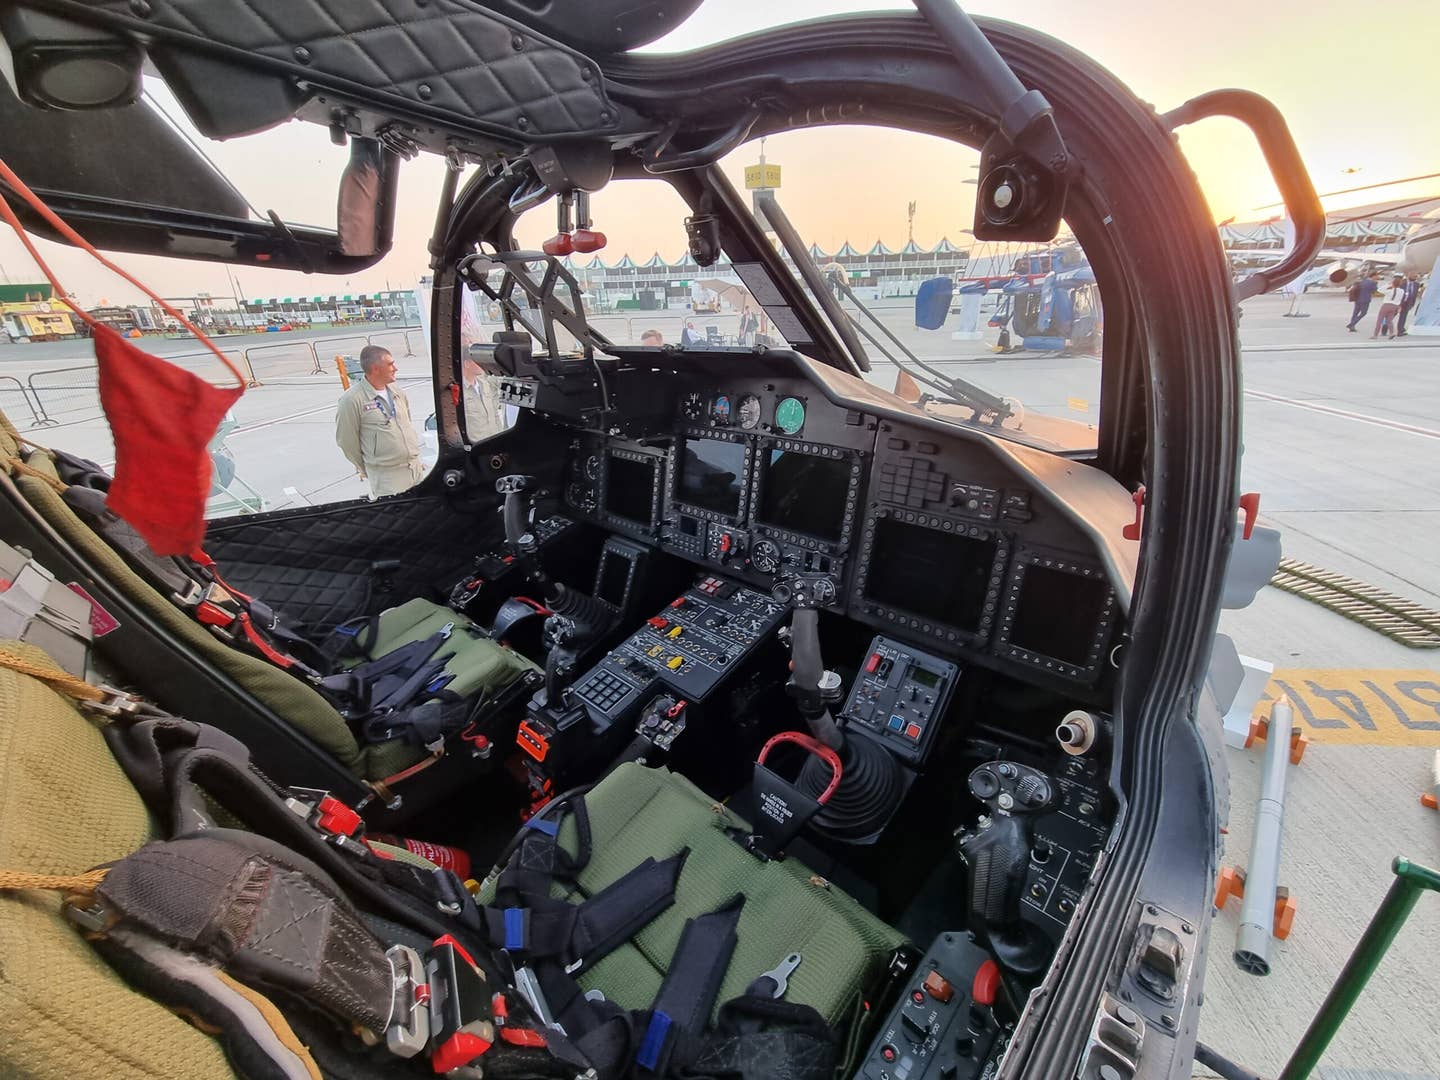 The cockpit of the upgraded Ka-52M version, showing the side-by-side seating and the handles to initiate the crew extraction sequence in an emergency. <em>Mztourist/Wikimedia Commons</em>